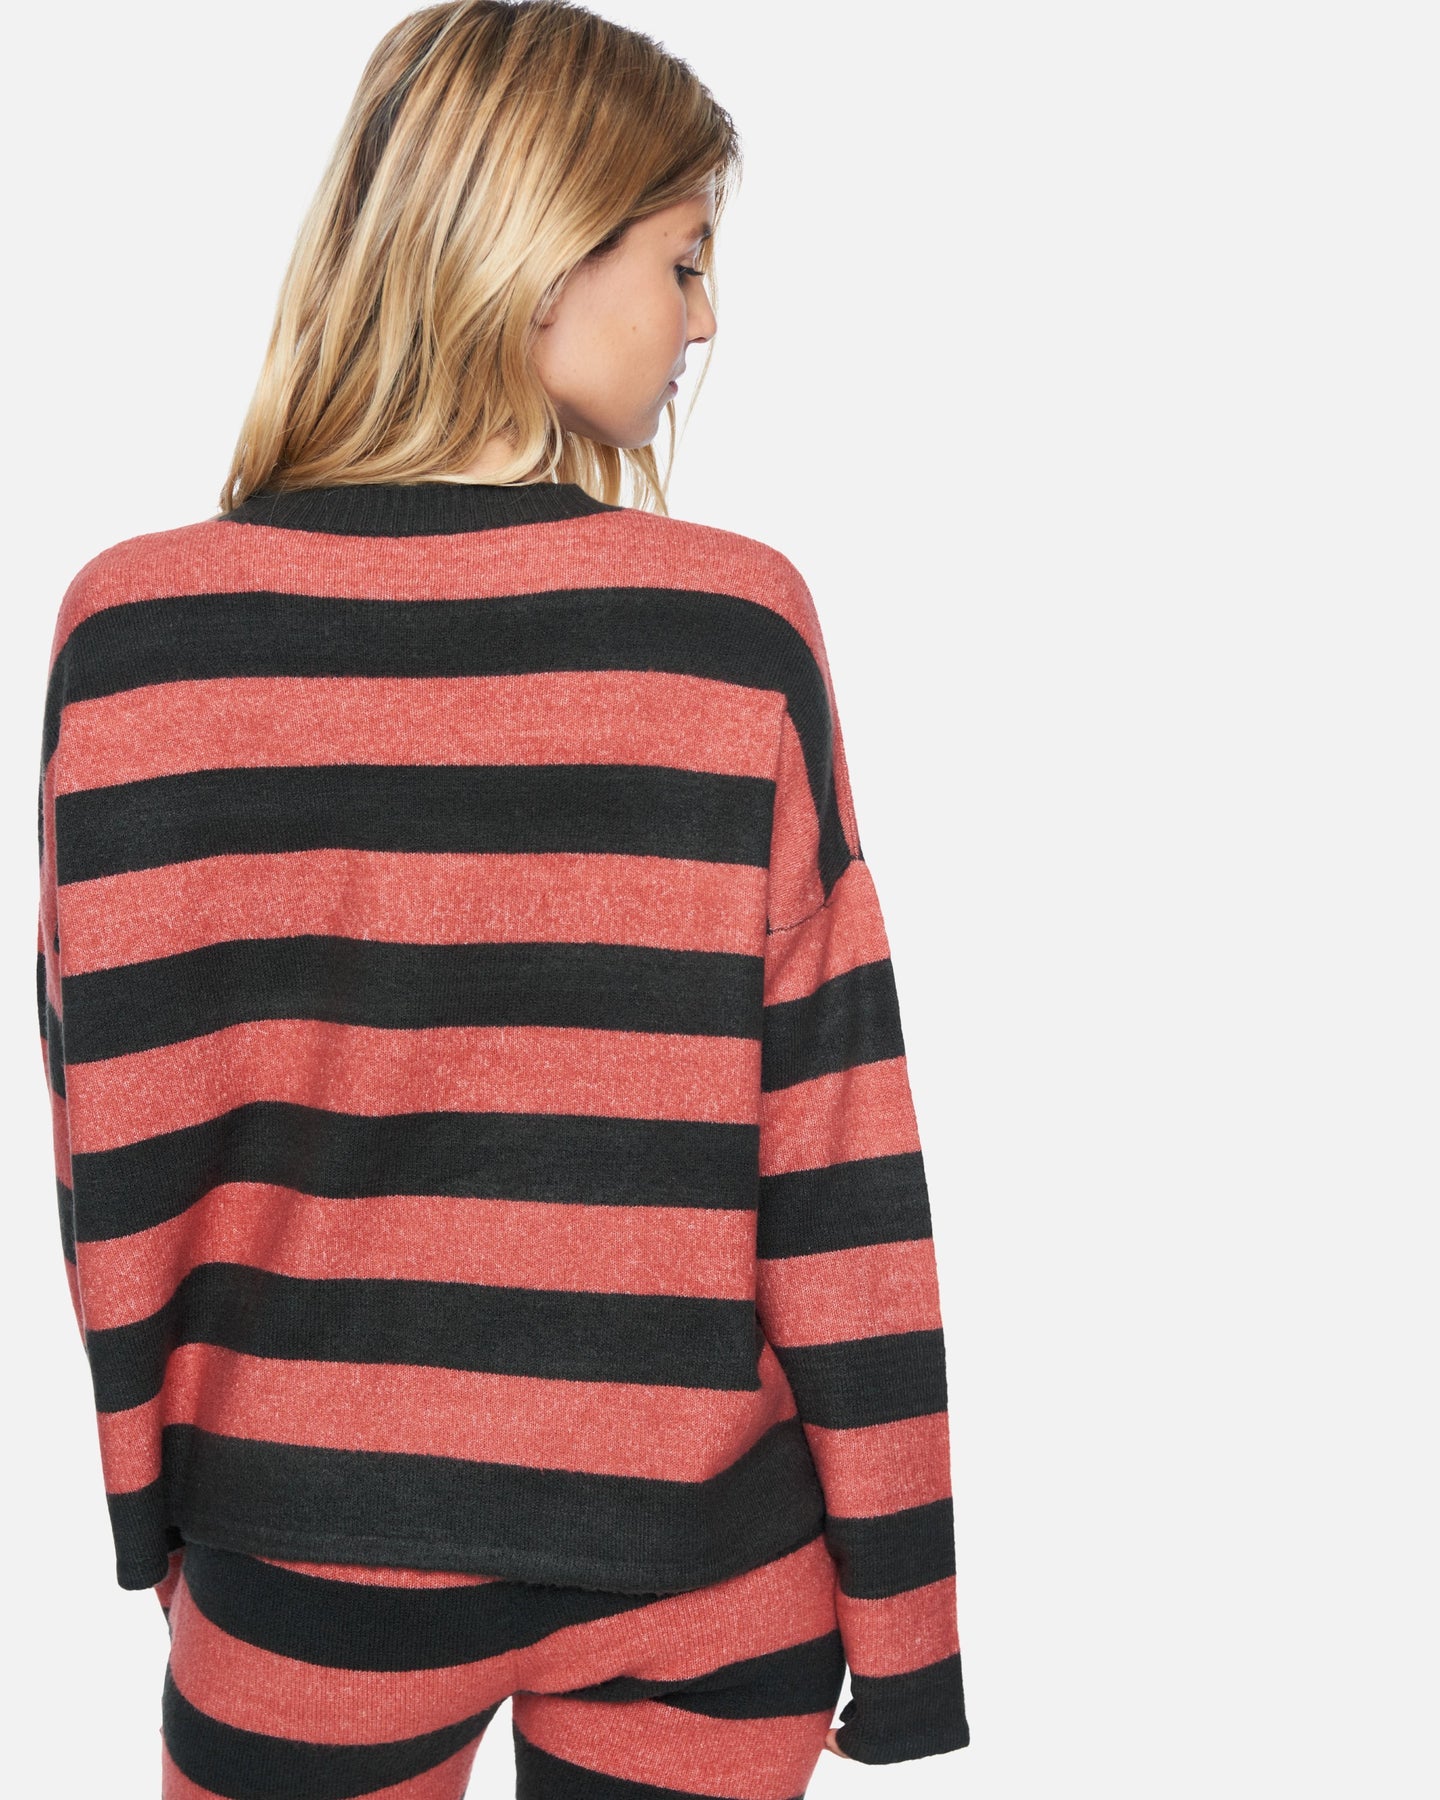 Hurley - Dropped Shoulder Sweater